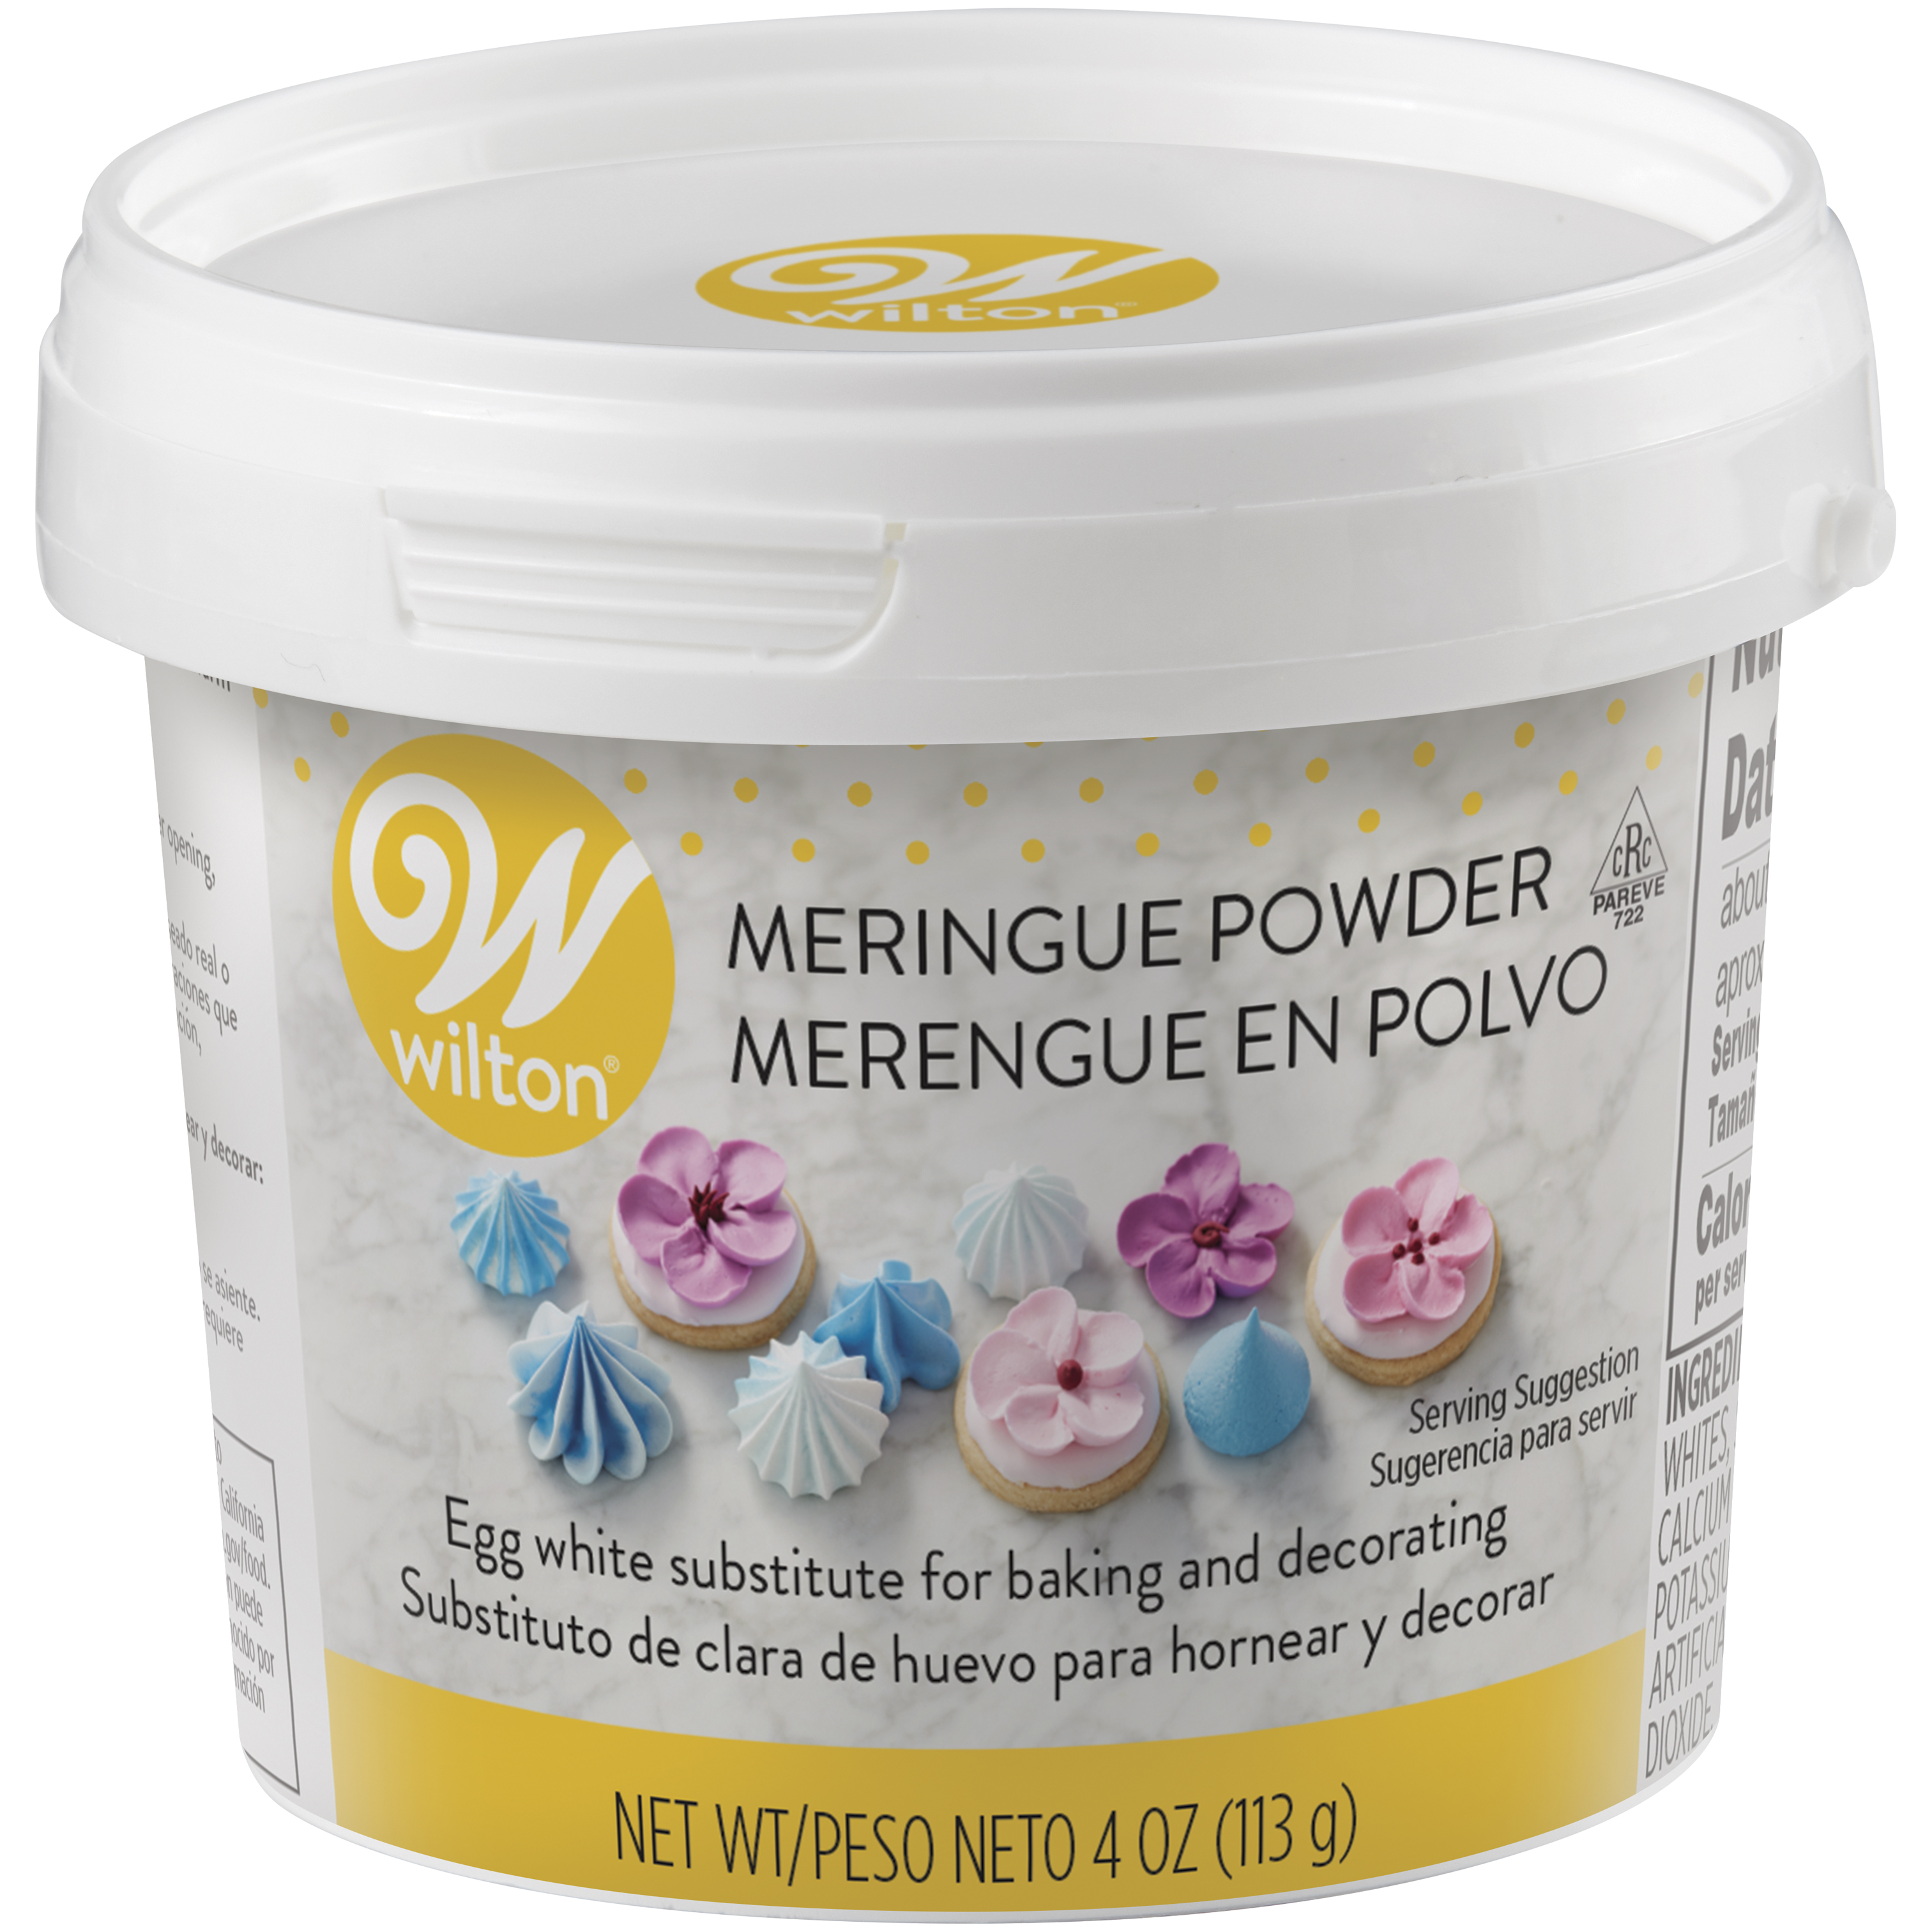 Wilton Meringue Powder for Baking and Decorating, Egg White Substitute, 4 oz., No Flavor - image 1 of 8